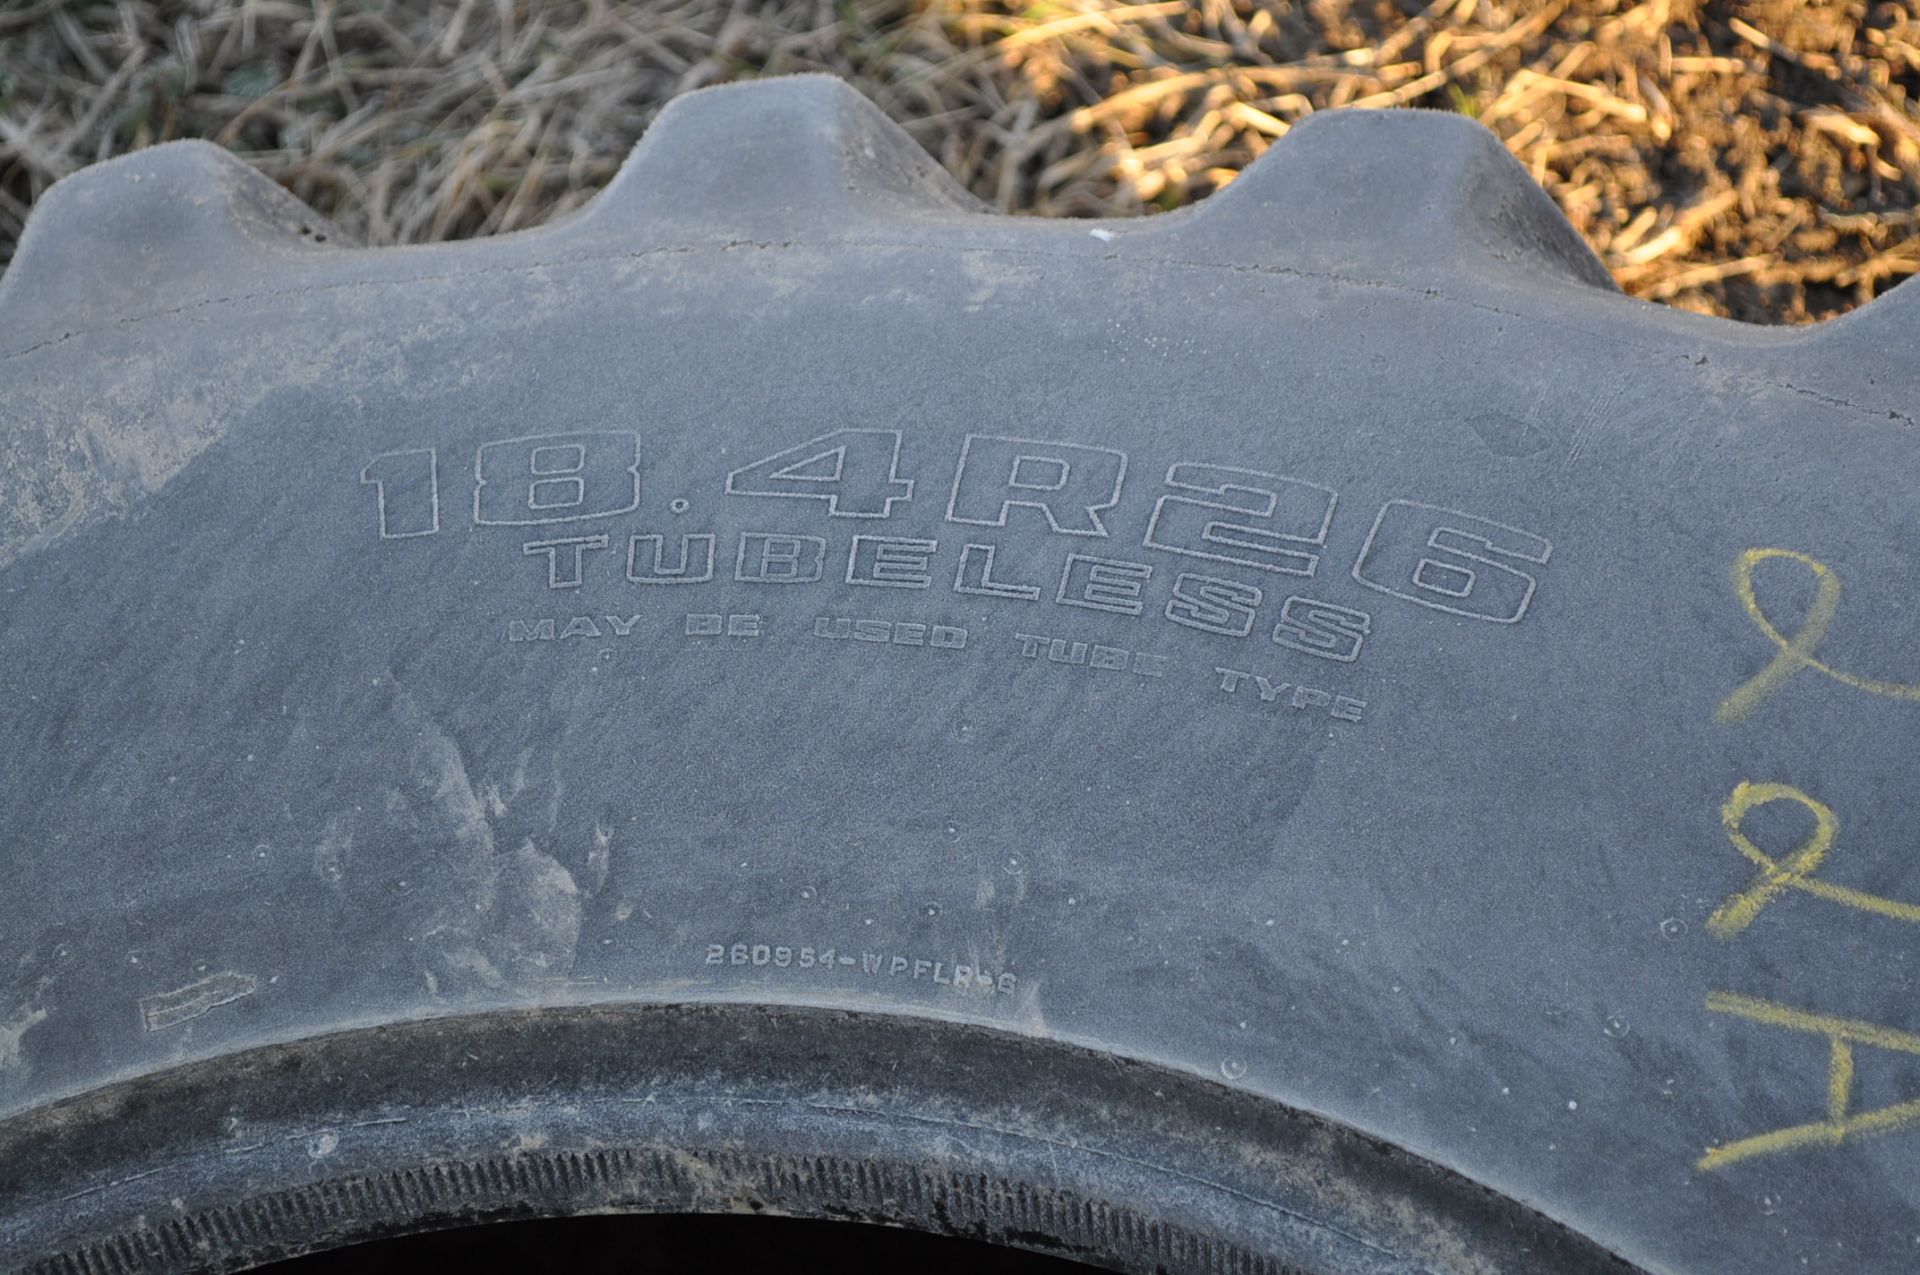 18.4R26 tire - Image 2 of 3